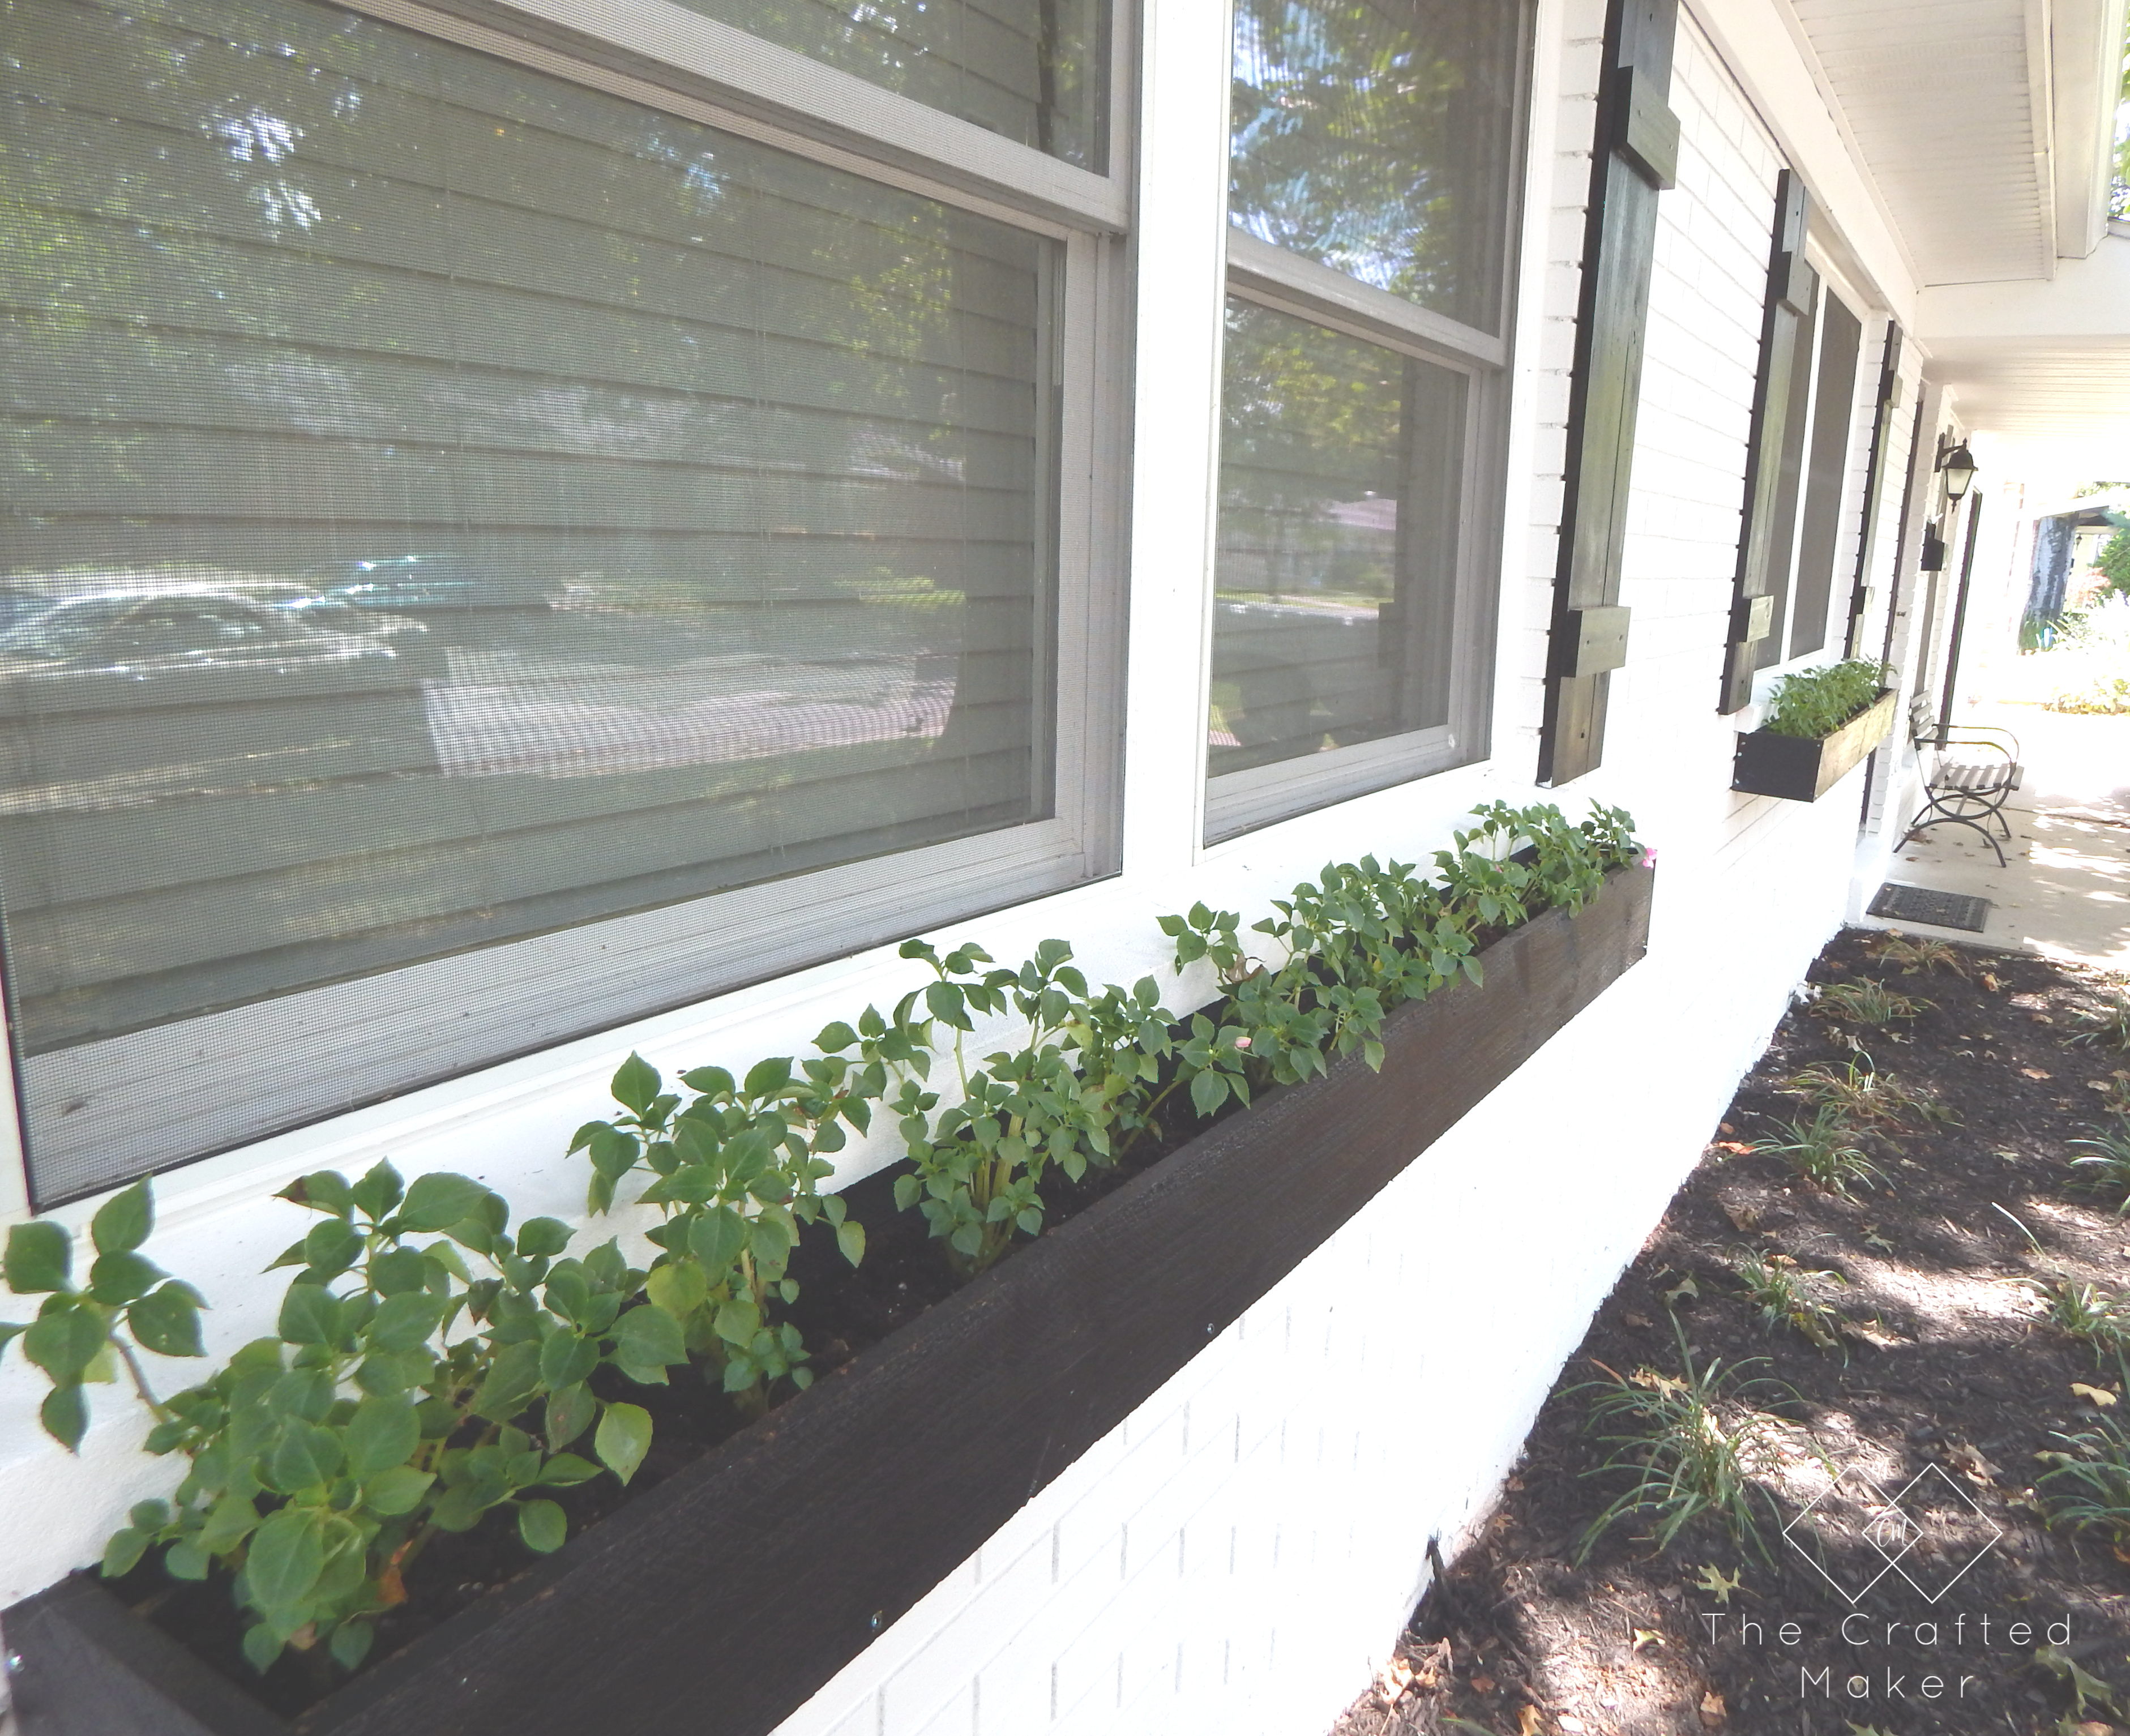 Spruce up the front of your home this Spring and Summer with an easy and quick 5 dollar window box. Plant some flowers and add color to your home.